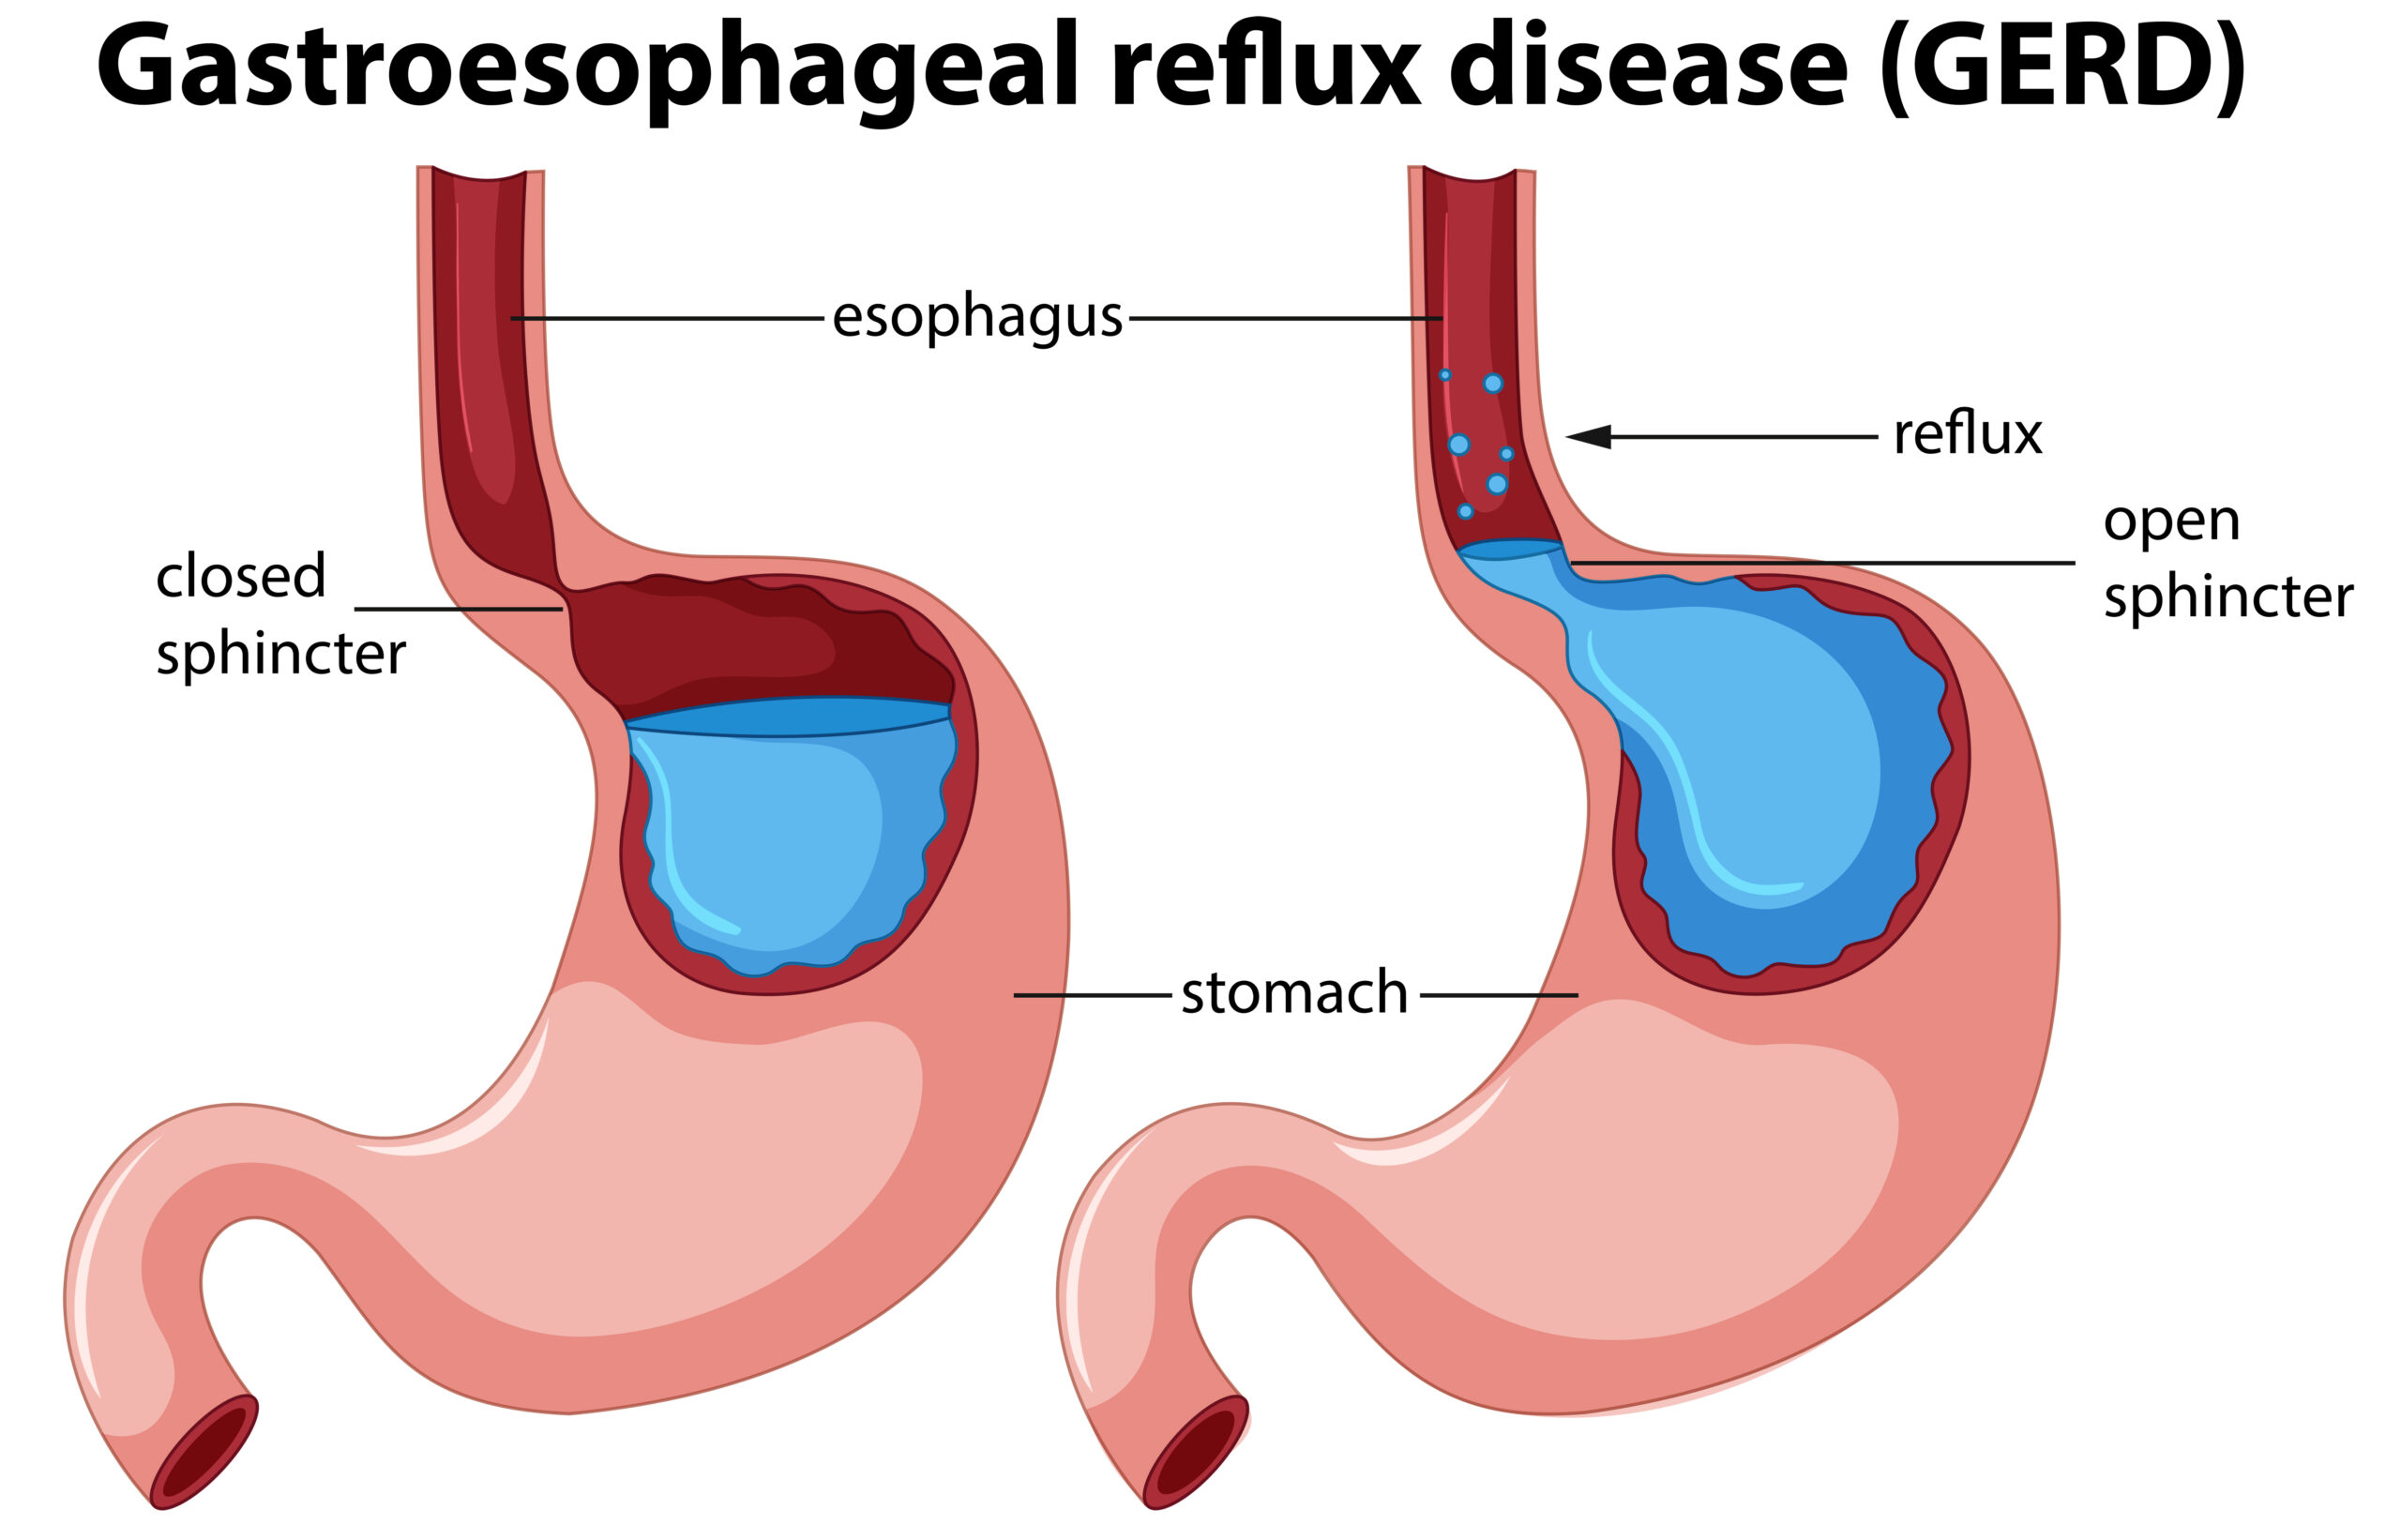 What Should You Know About Acid Reflux (GERD)?